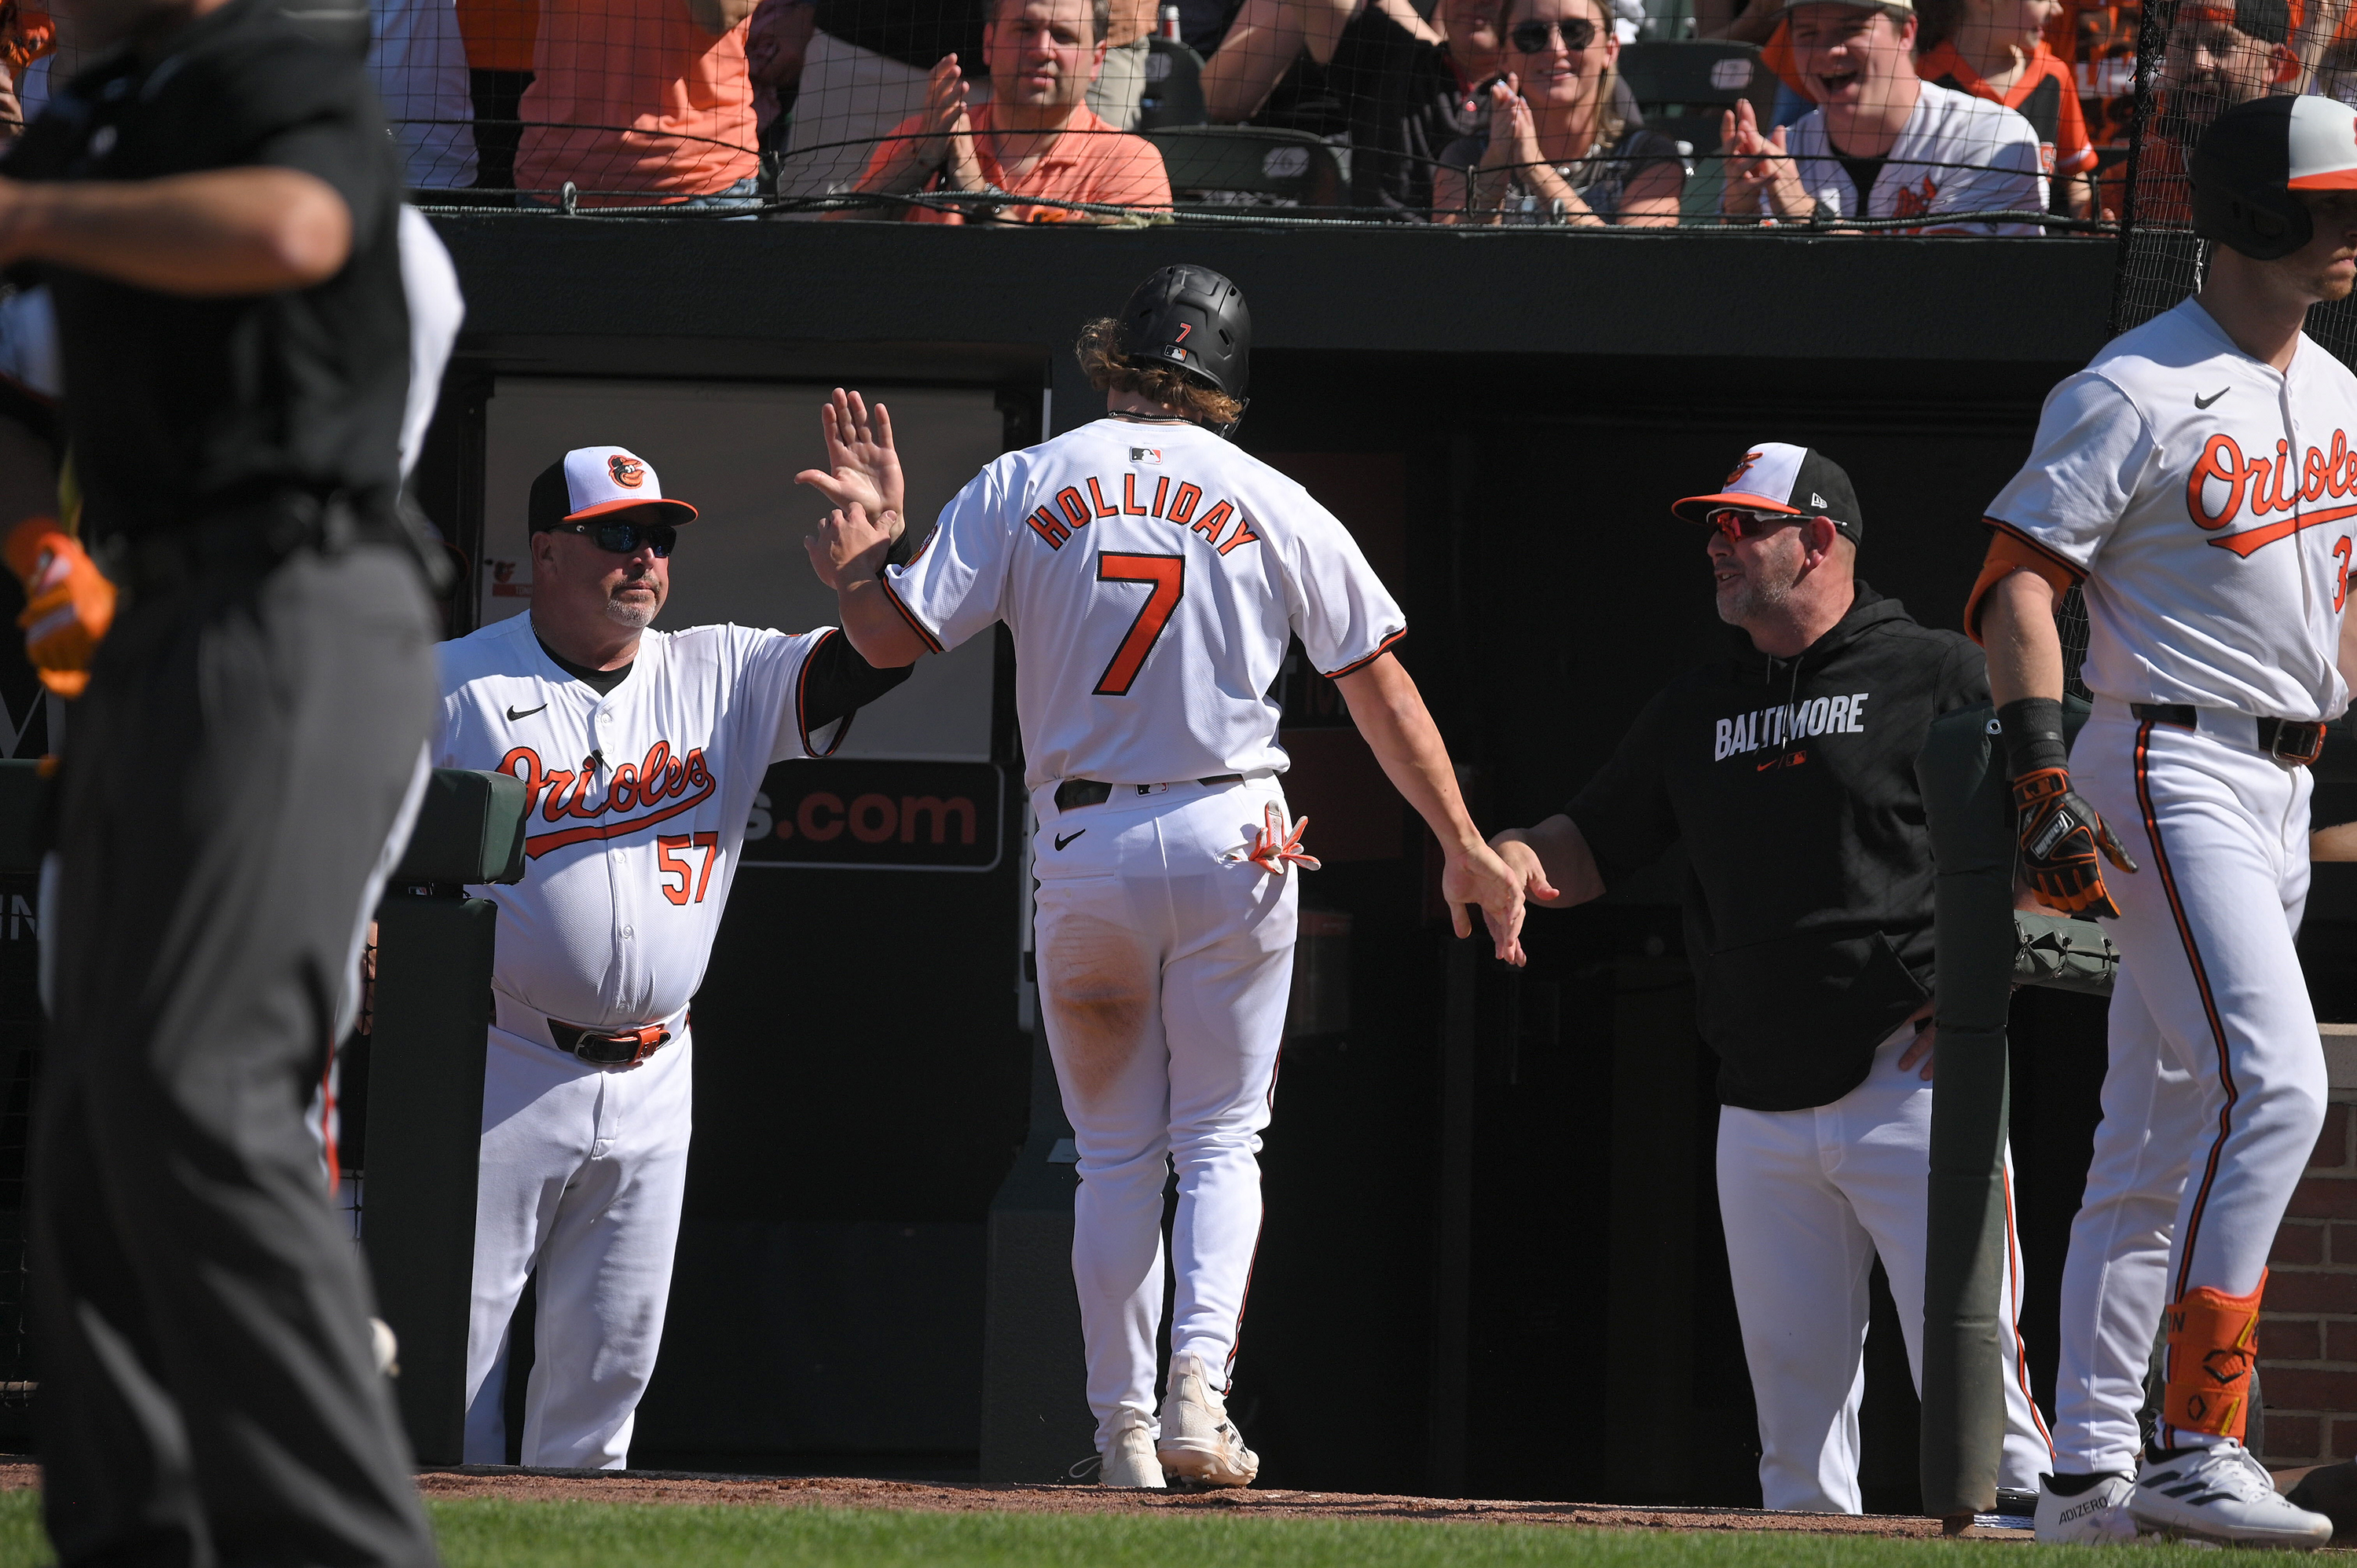 Orioles' Jackson Holliday celebrates as he enters the dugout after scoring in the seventh inning. He had his first MLB hit, a single, during the inning in a game against the Milwaukee Brewers. (Kenneth K. Lam/staff)